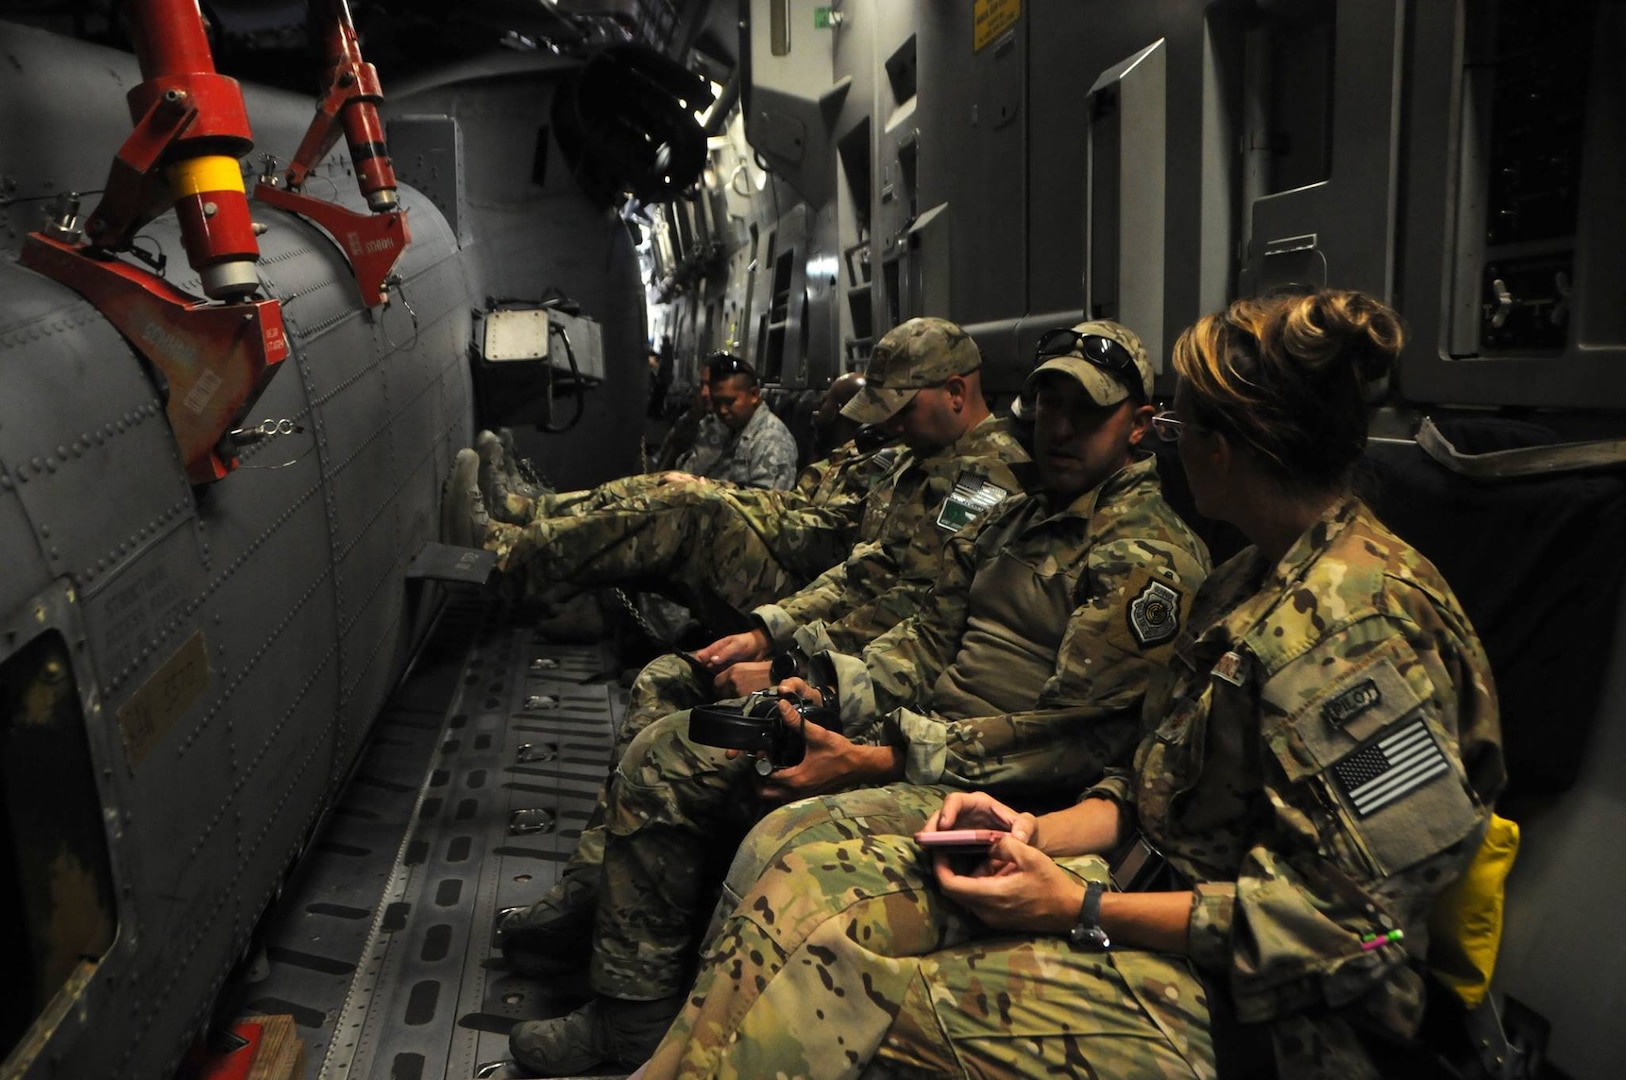 National Guard members sit in a C-17 Globemaster aircraft waiting for take off